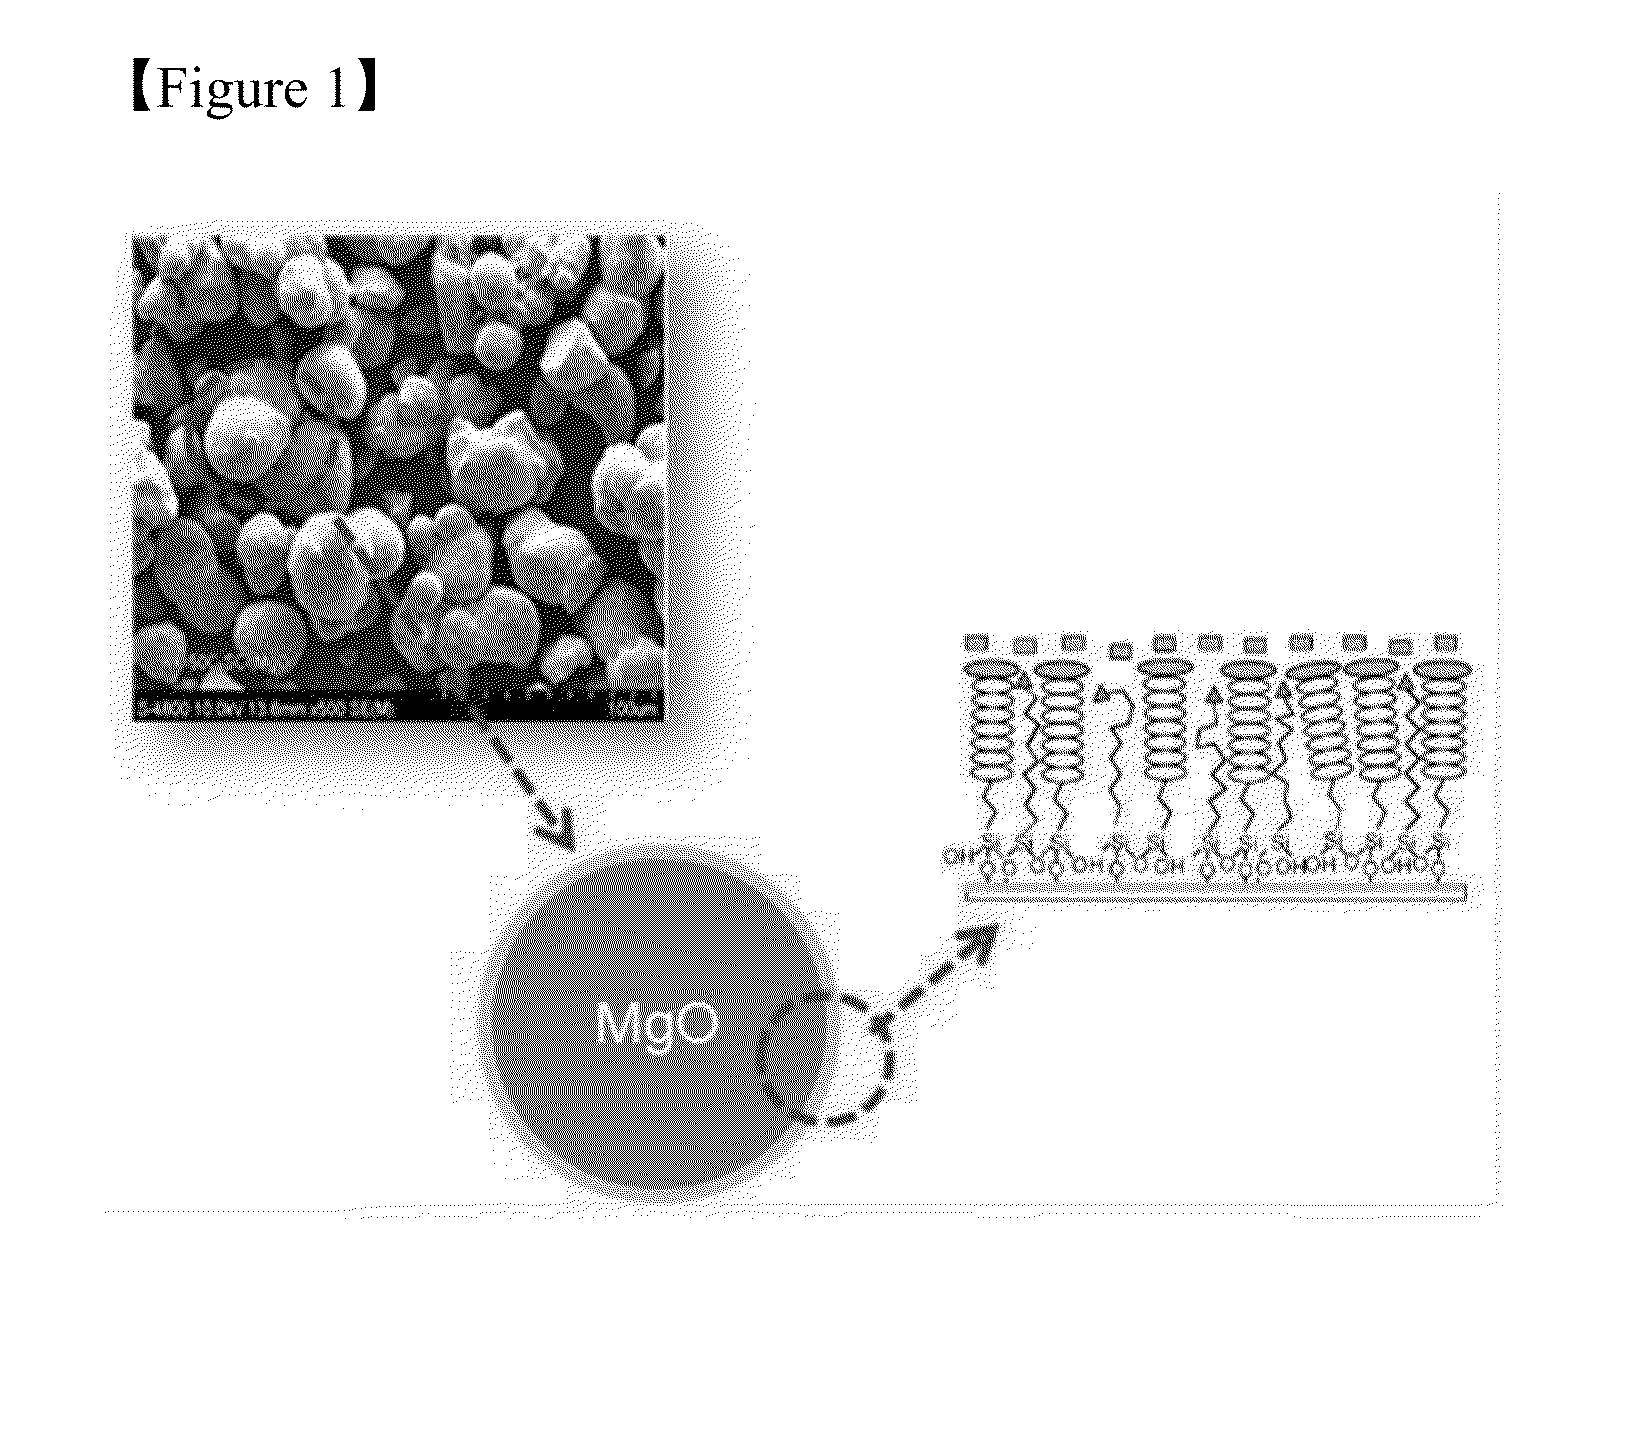 Thermoplastic Resin Composition Having Improved Thermal Conductivity and Articles Thereof